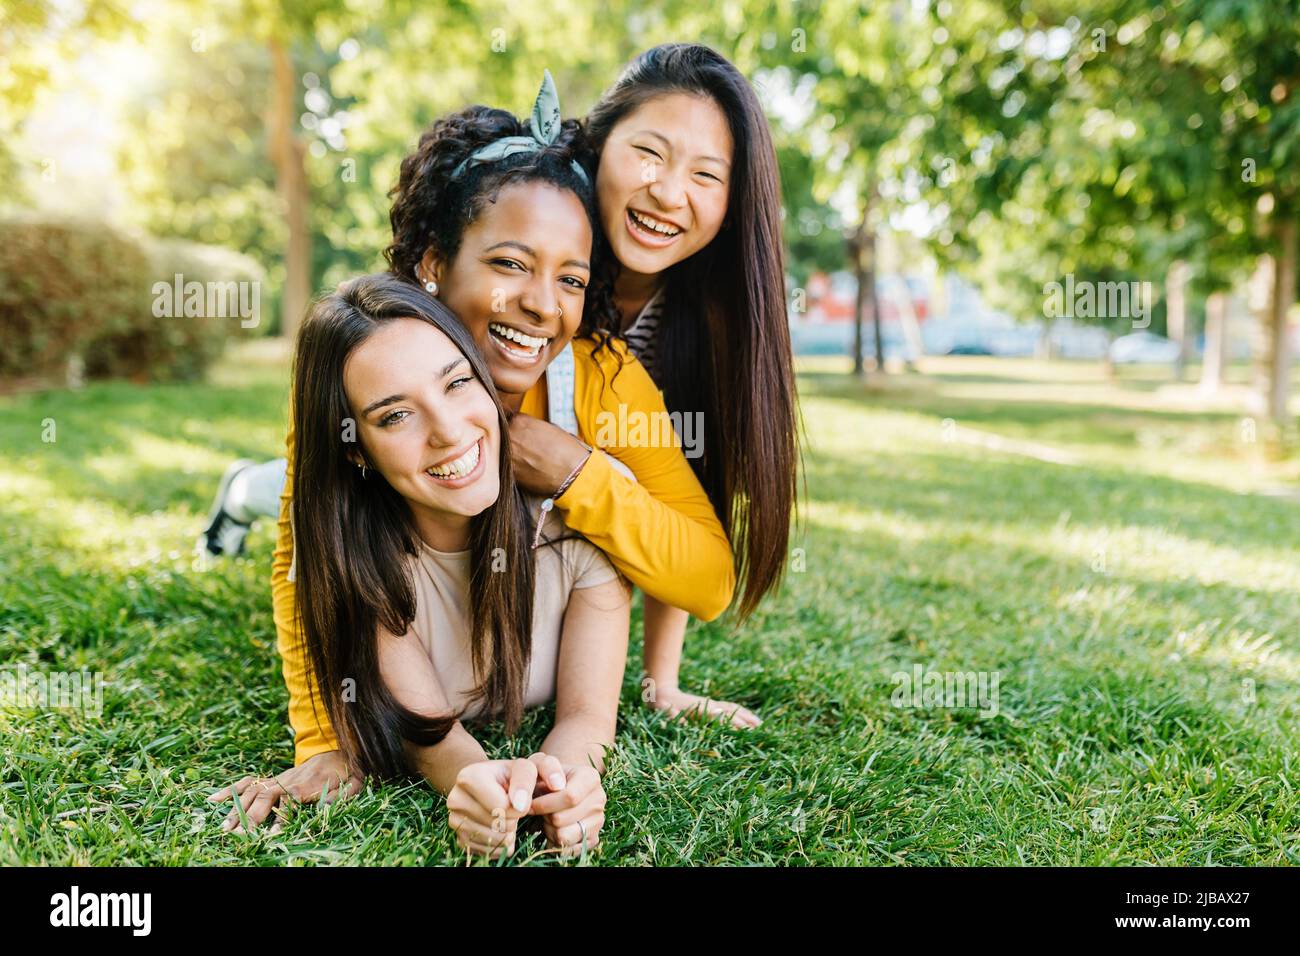 Happy young women best friends having fun together outdoors Stock Photo